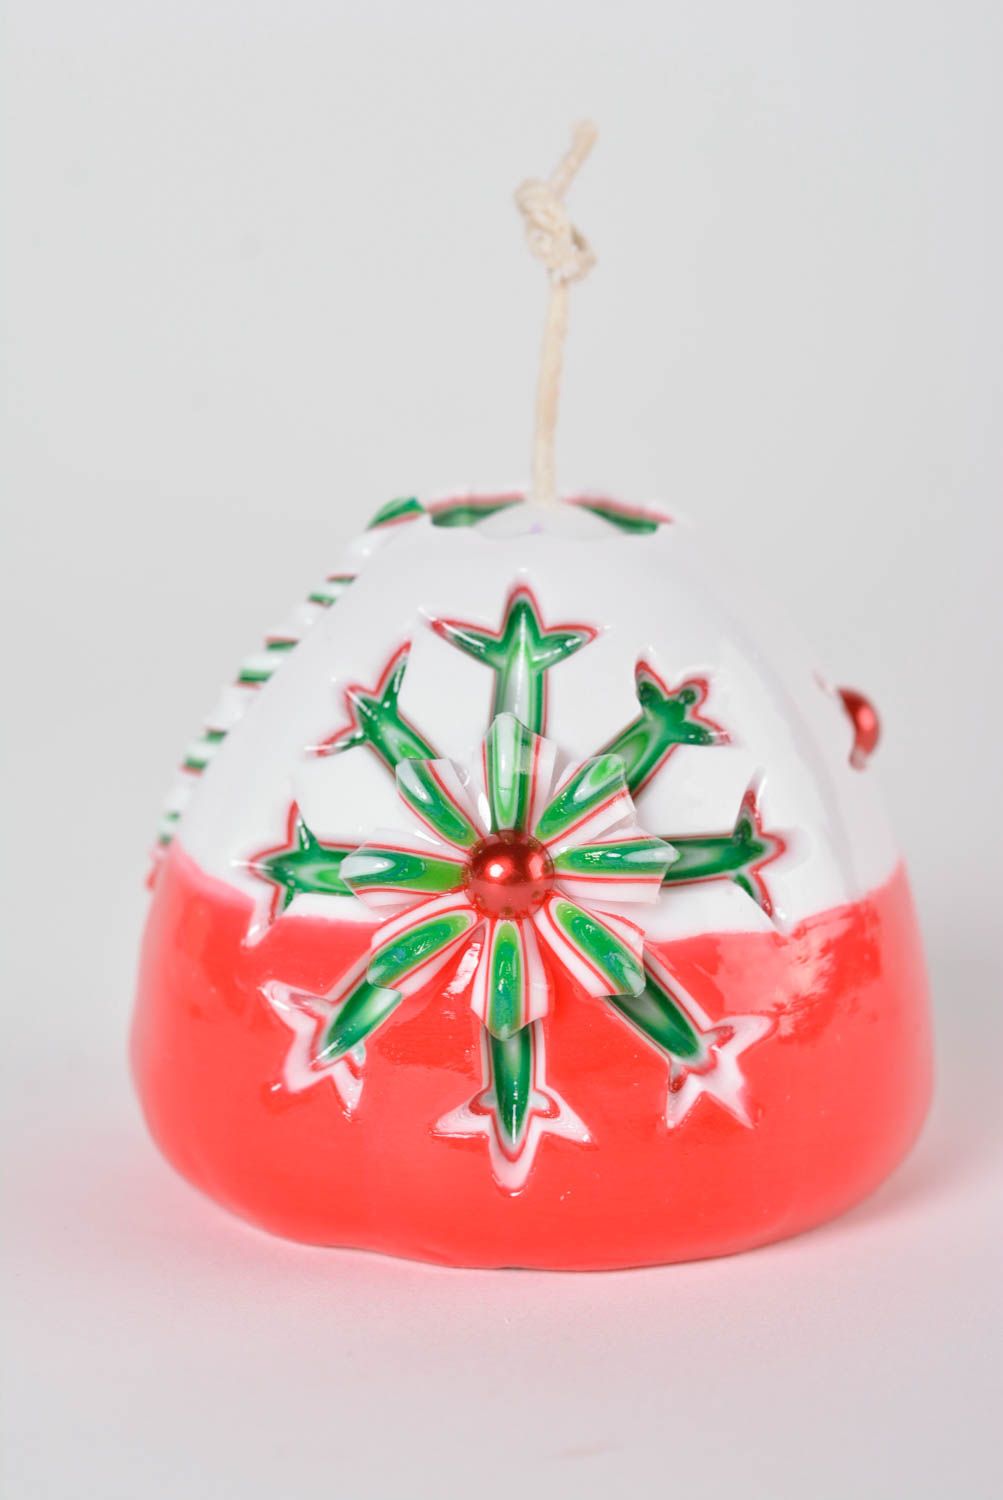 Handmade festive candles Christmas candle designs home decoration gift ideas photo 2